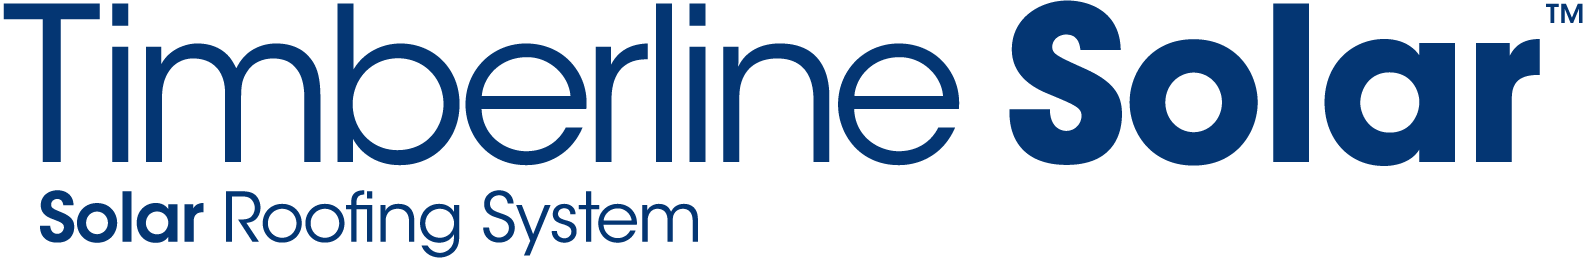 Timberline Solar Roofing Logo